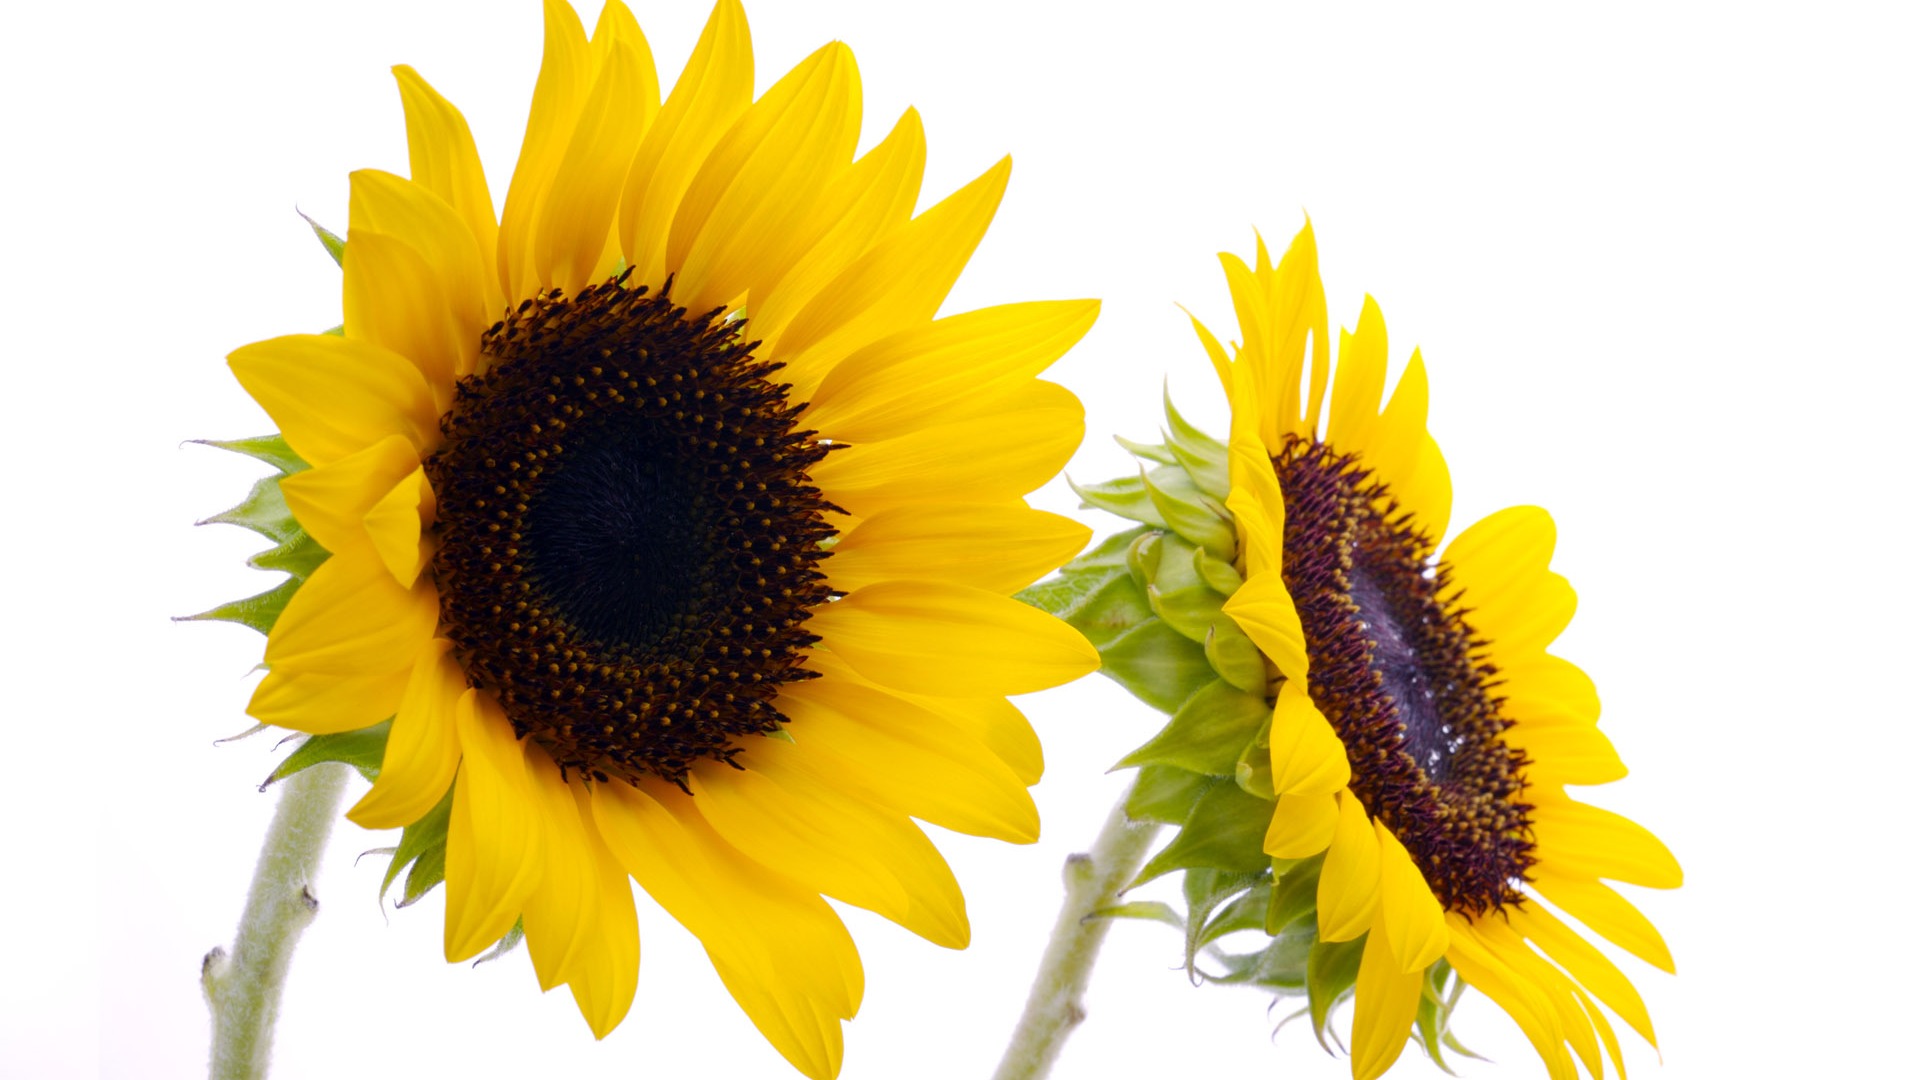 Sunny sunflower photo HD Wallpapers #28 - 1920x1080